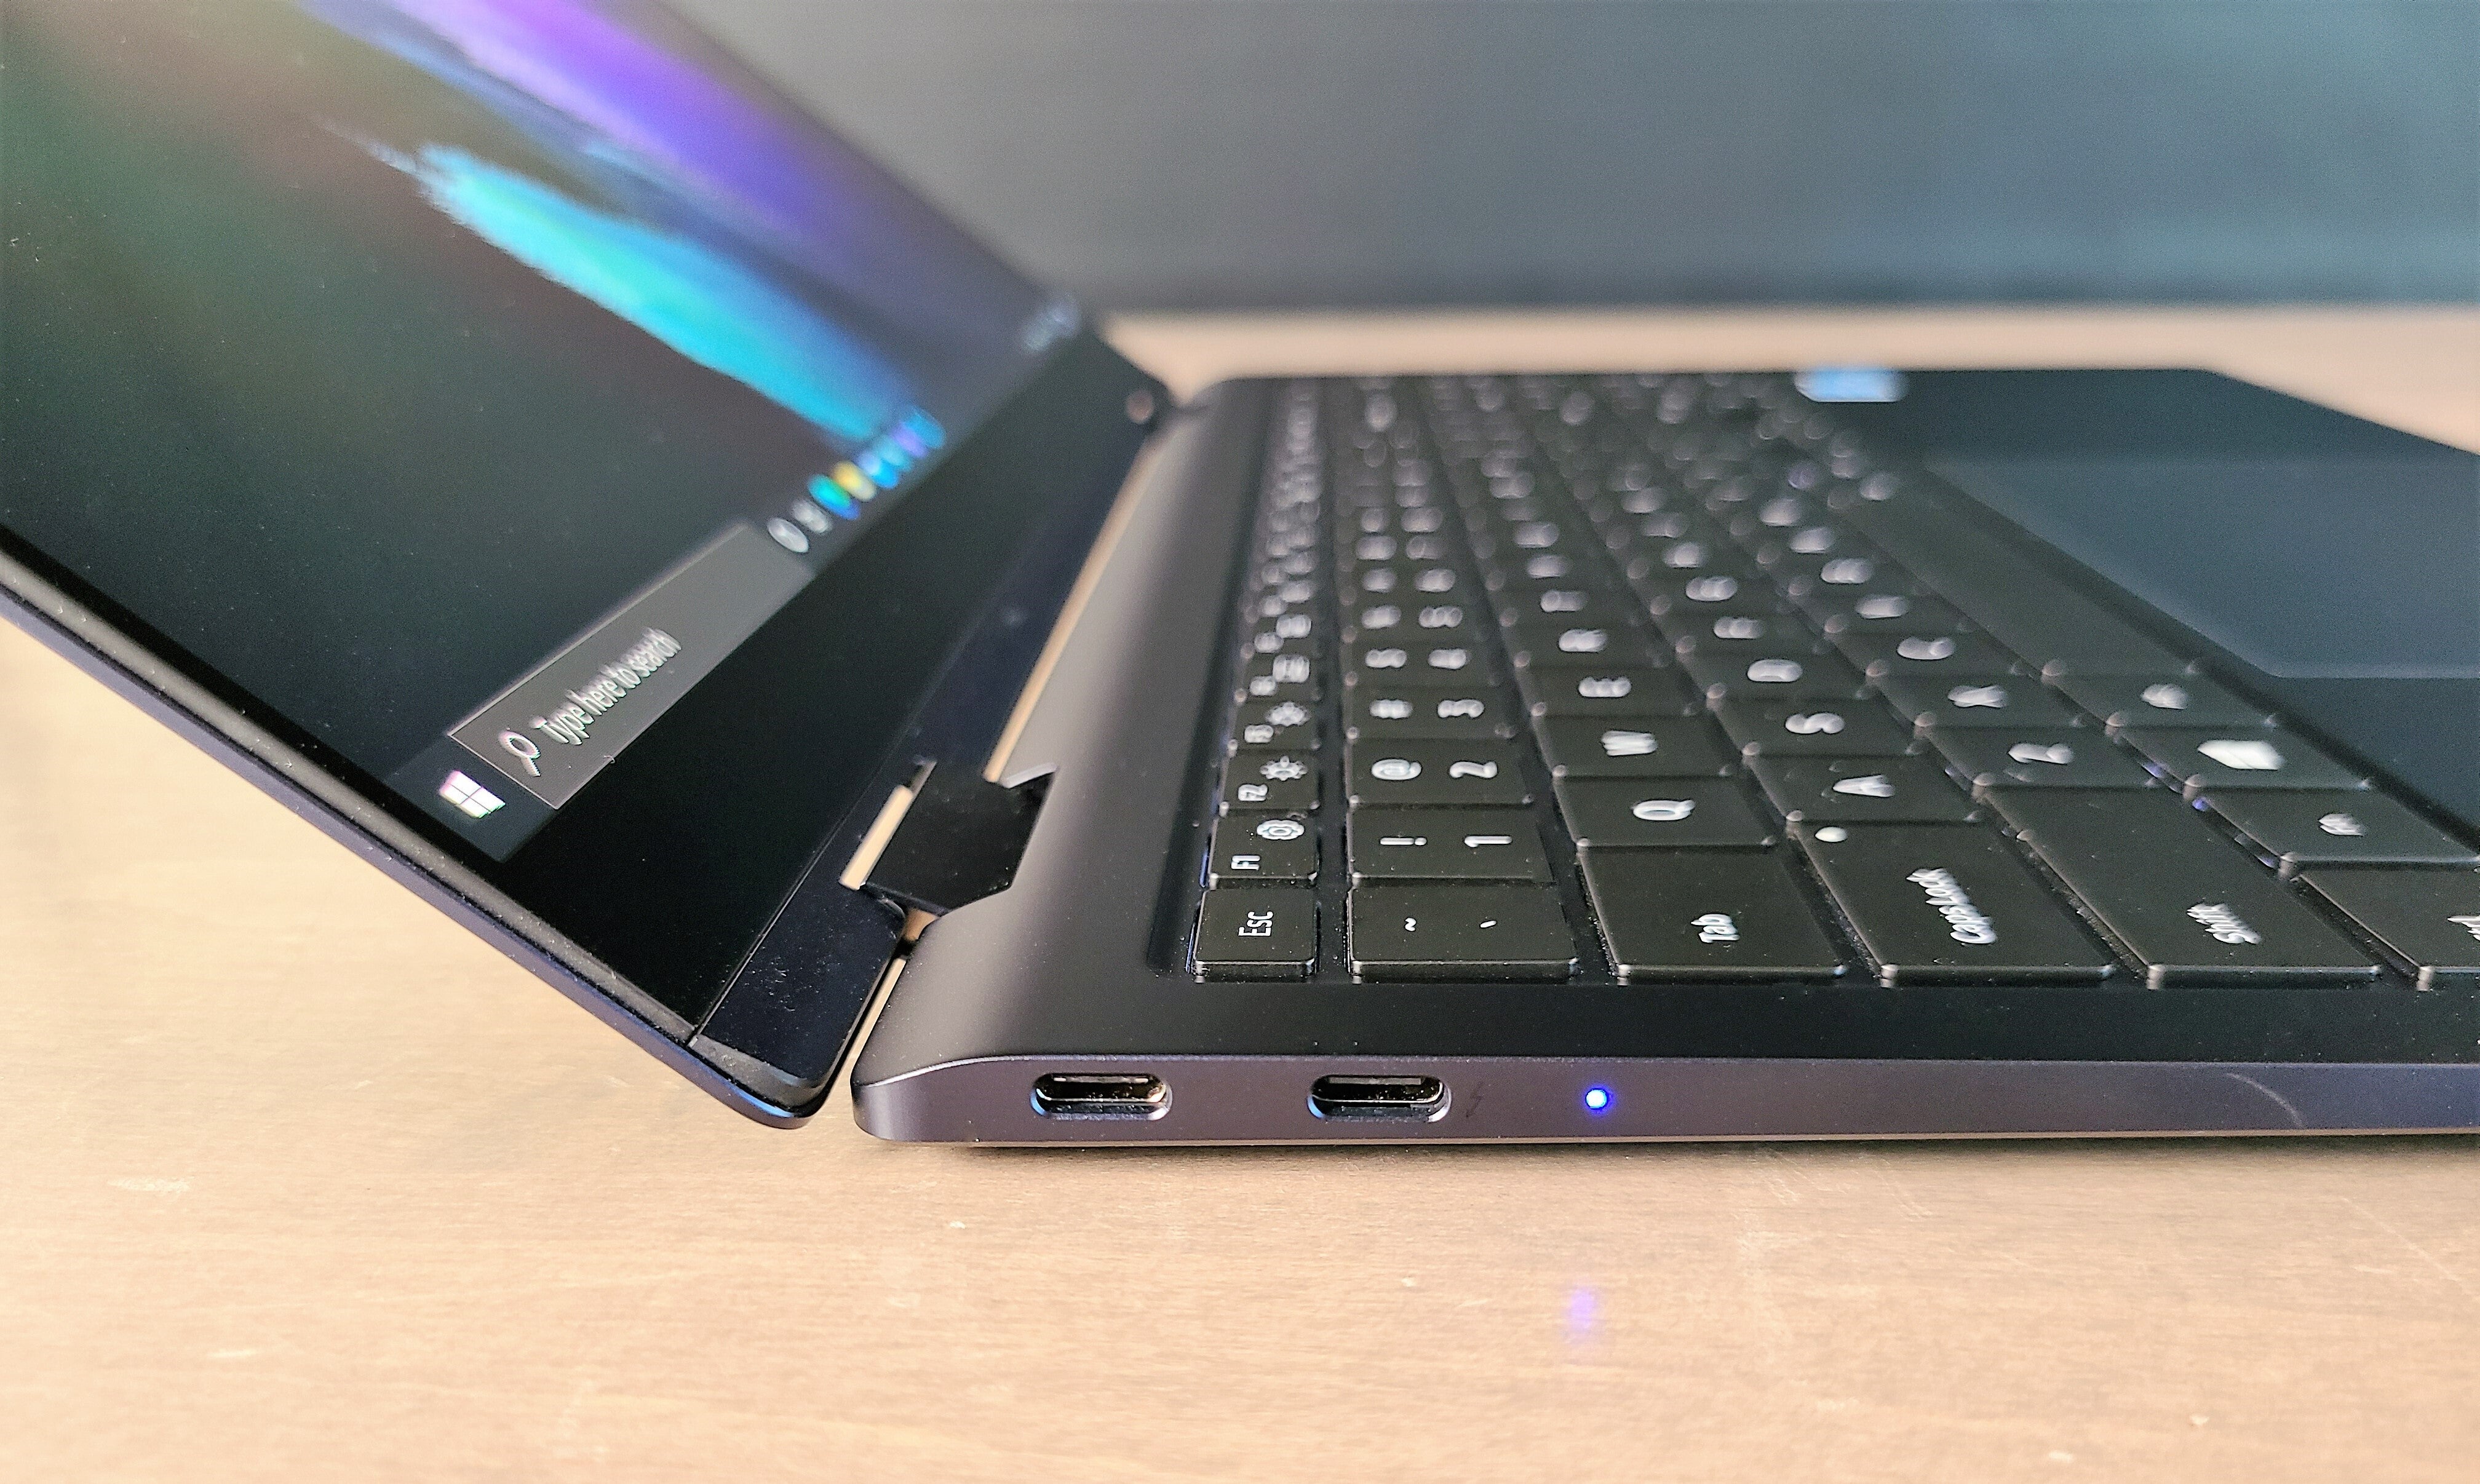 Samsung Galaxy Book Pro 360 review A beautiful thinandlight PC PC